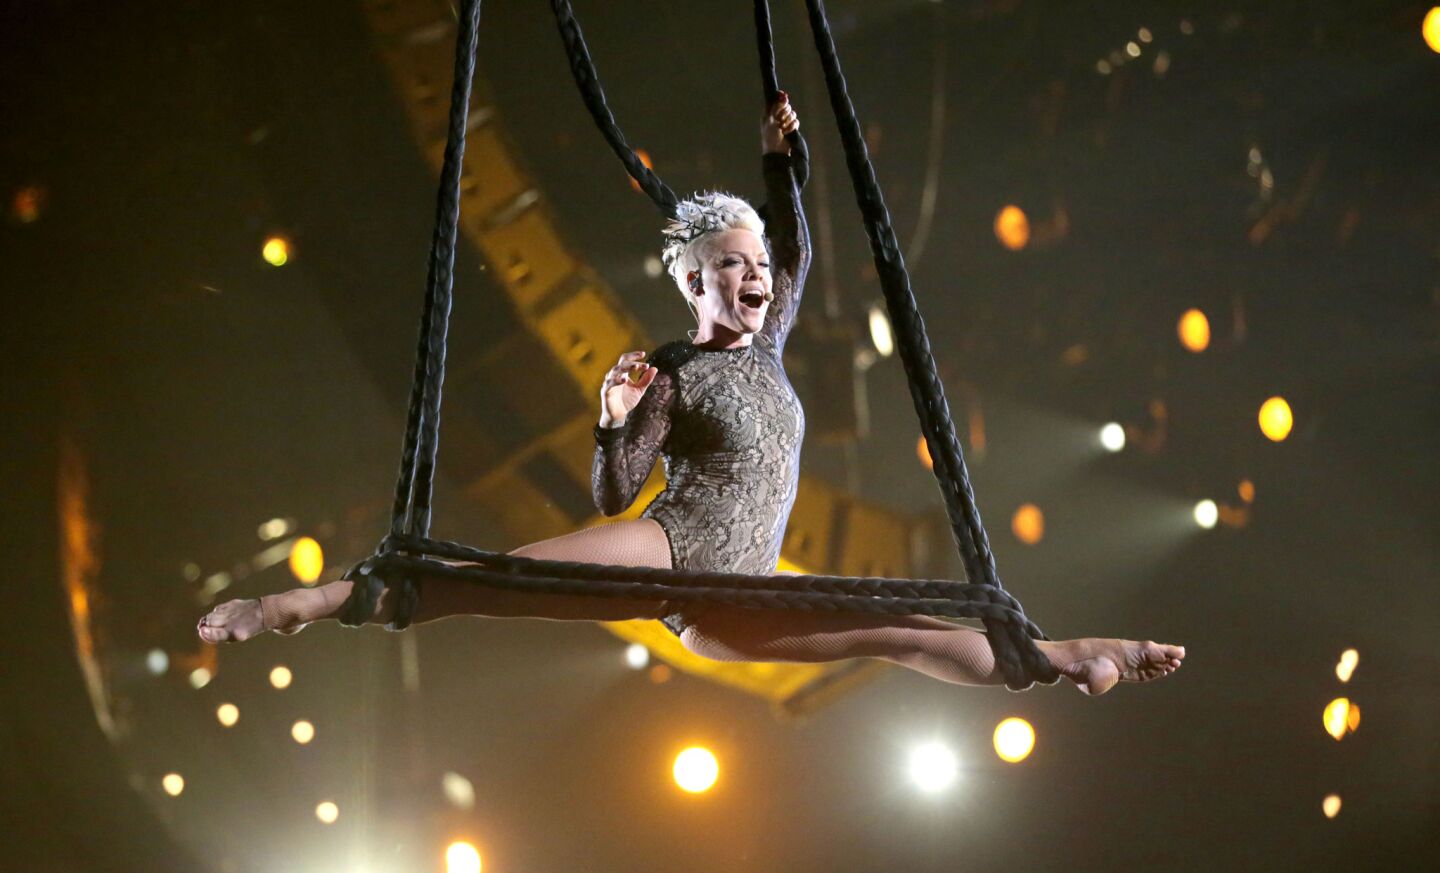 Pink will inject some cool into the oft-stuffy Academy Awards ceremony with a "highly anticipated moment," according to show producers. The formidable performer joins a lineup that already includes Pharrell, U2 and Karen O. What's she going to sing? Doesn't matter as long as she's channeling the entire Cirque cast during her gravity-defying performance. Still, she can sing yet didn't win a Grammy this year and has been thin on awards for her solo work over the past decade. Seriously, how many more ceilings does homegirl have to swing from for her brilliance to be recognized?